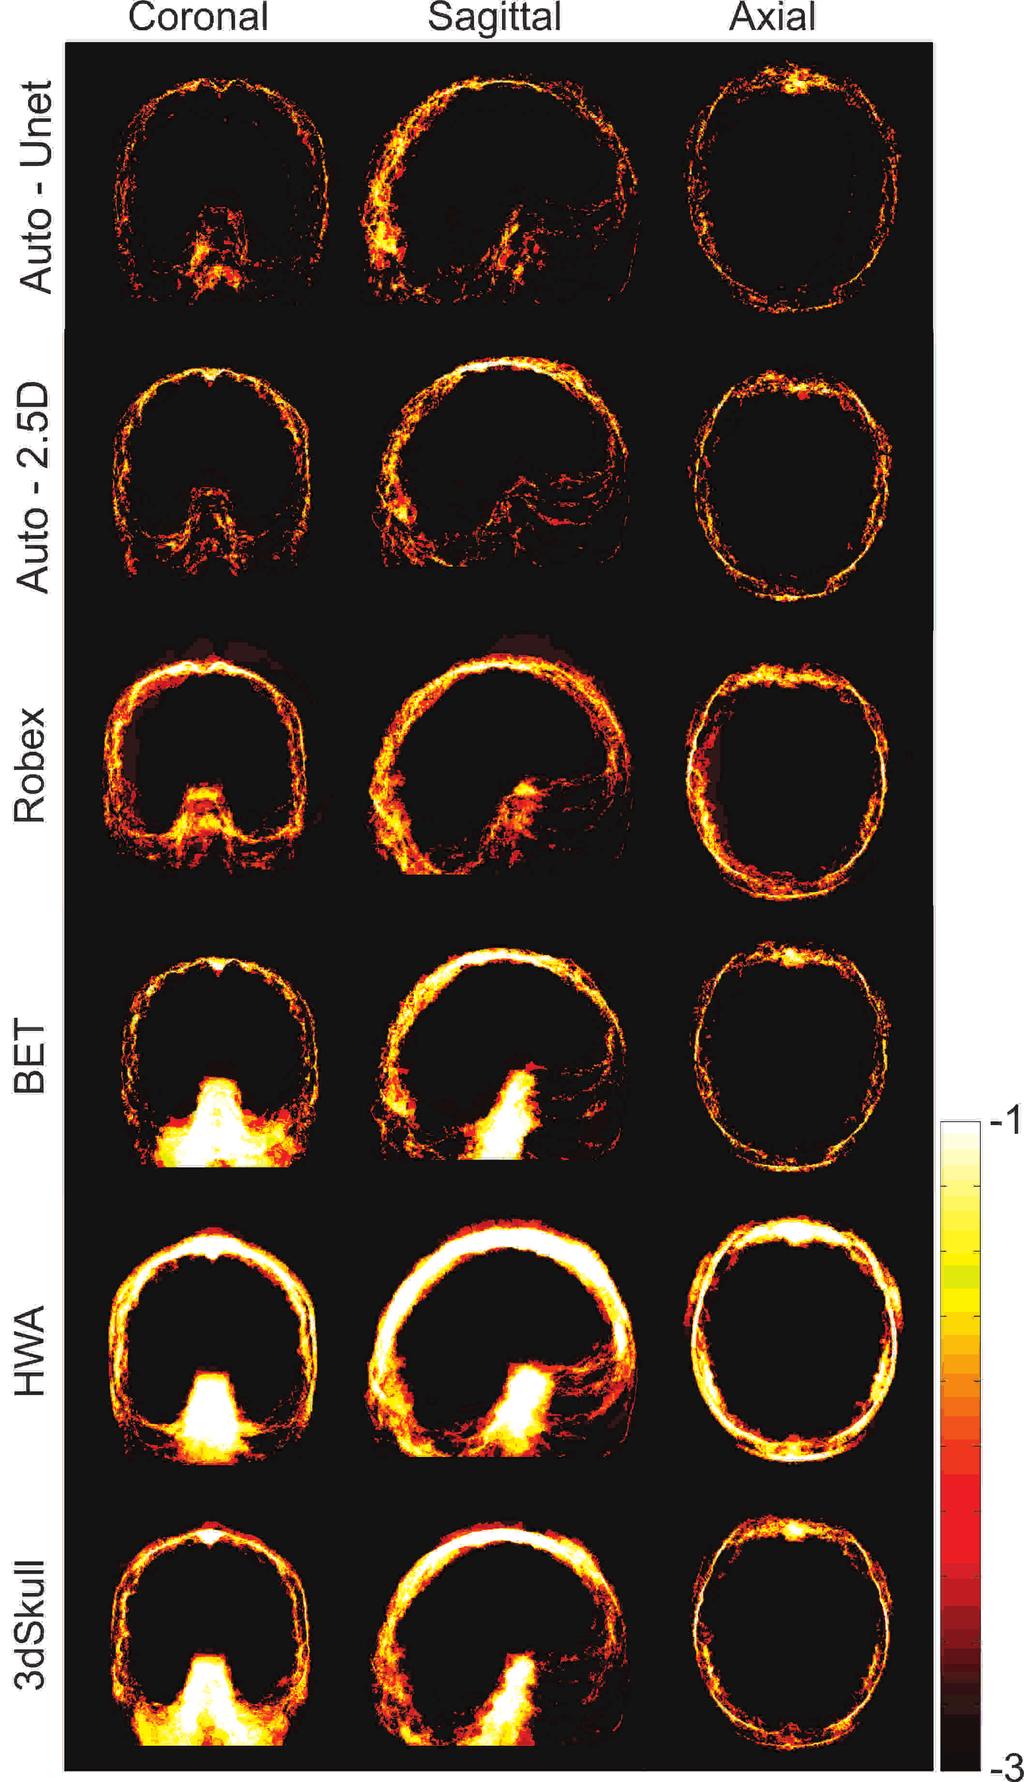 10 Figure 6. Logarithmic-scale absolute error maps of brain extraction obtained from six algorithms on the LPBA40 dataset.